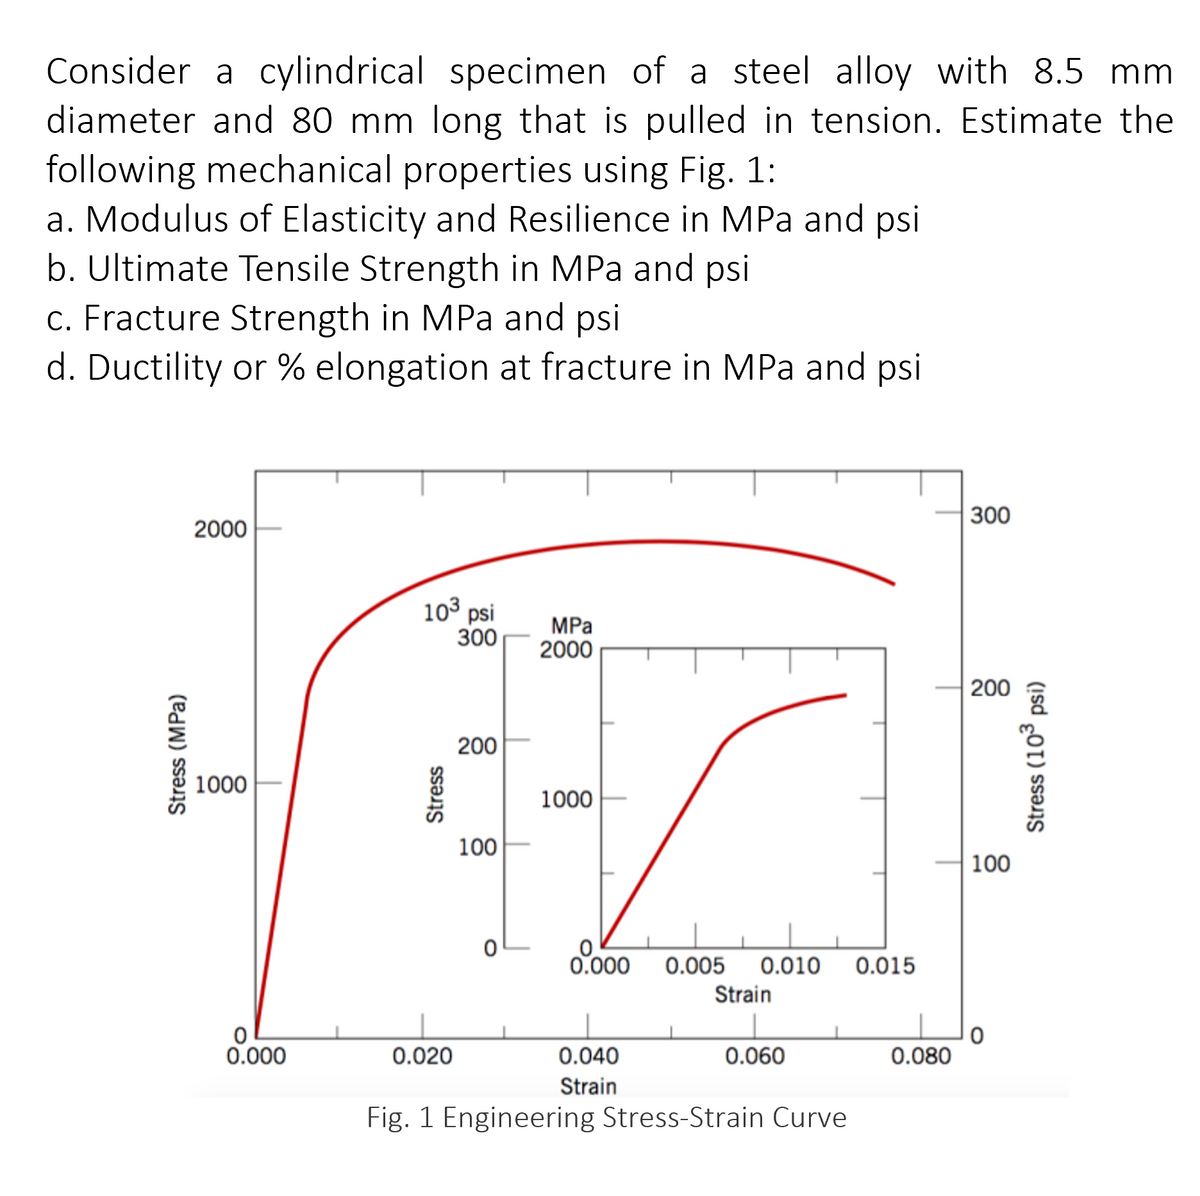 Consider a cylindrical specimen of a steel alloy with 8.5 mm
diameter and 80 mm long that is pulled in tension. Estimate the
following mechanical properties using Fig. 1:
a. Modulus of Elasticity and Resilience in MPa and psi
b. Ultimate Tensile Strength in MPa and psi
c. Fracture Strength in MPa and psi
d. Ductility or % elongation at fracture in MPa and psi
2000
10³ psi
MPa
300
2000
200
1000
100
0
0.000 0.005 0.010 0.015
Strain
0.020
0.040
0.060
Strain
Fig. 1 Engineering Stress-Strain Curve
Stress (MPa)
1000
0
0.000
Stress
0.080
300
200
100
0
Stress (10³ psi)